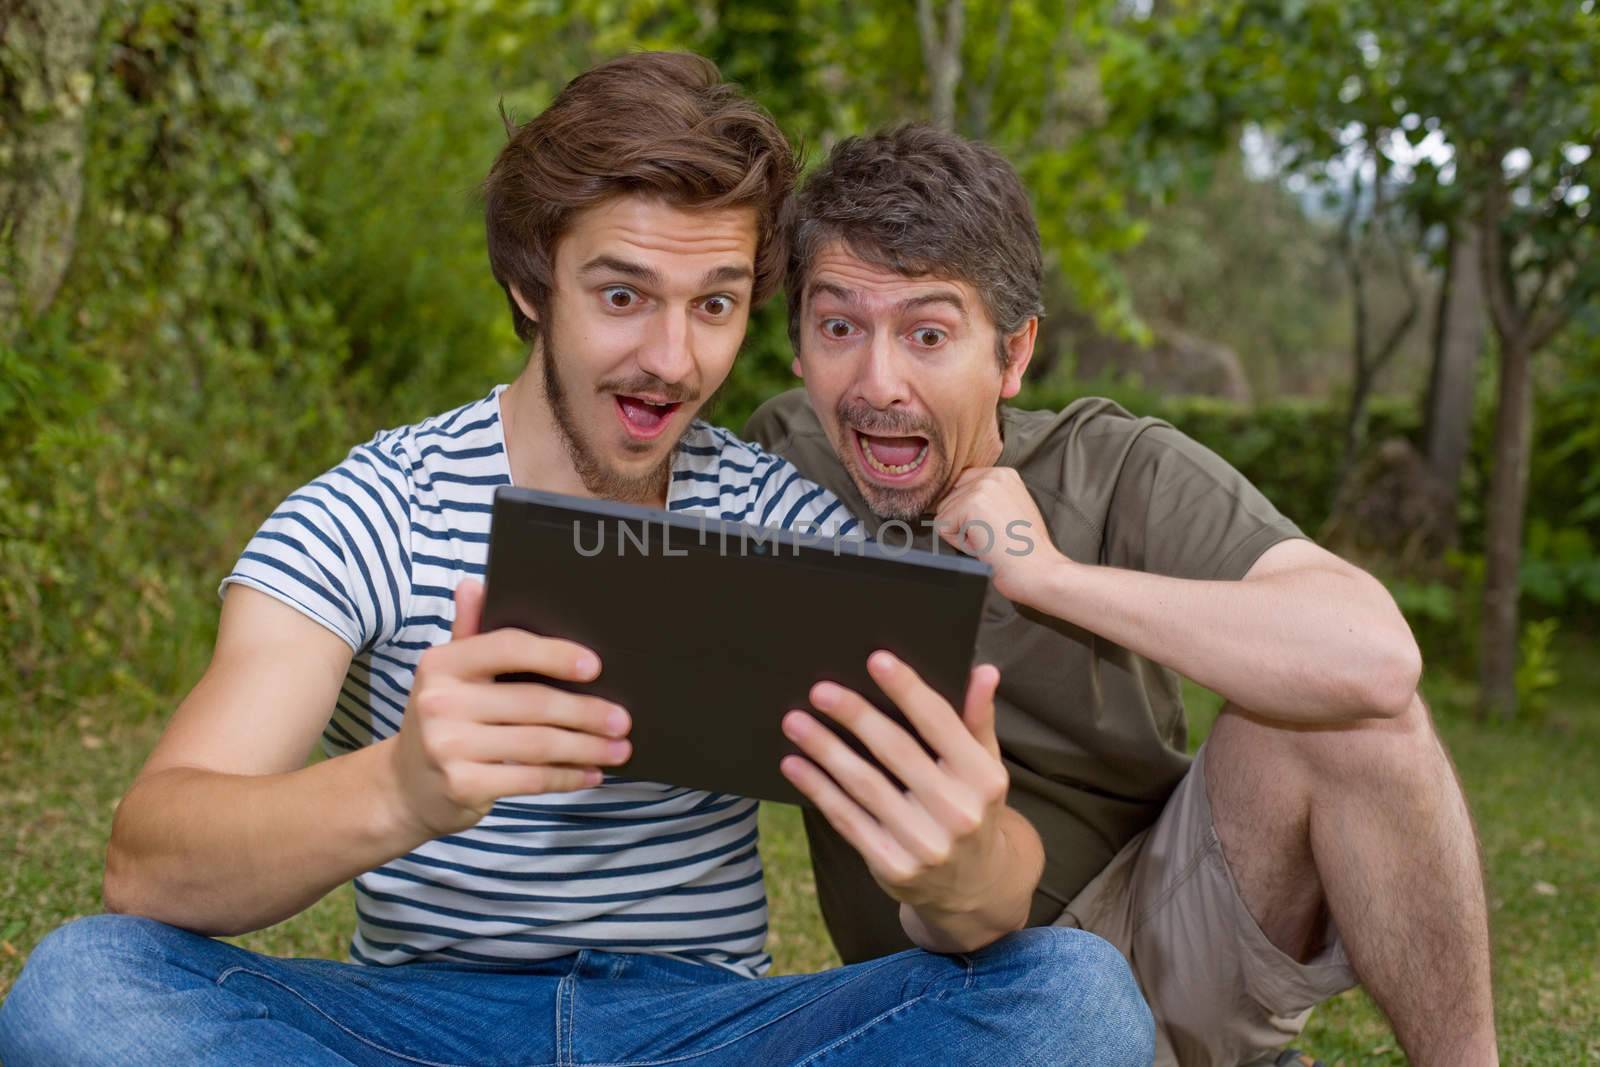 casual men surprised with a tablet pc, outdoor